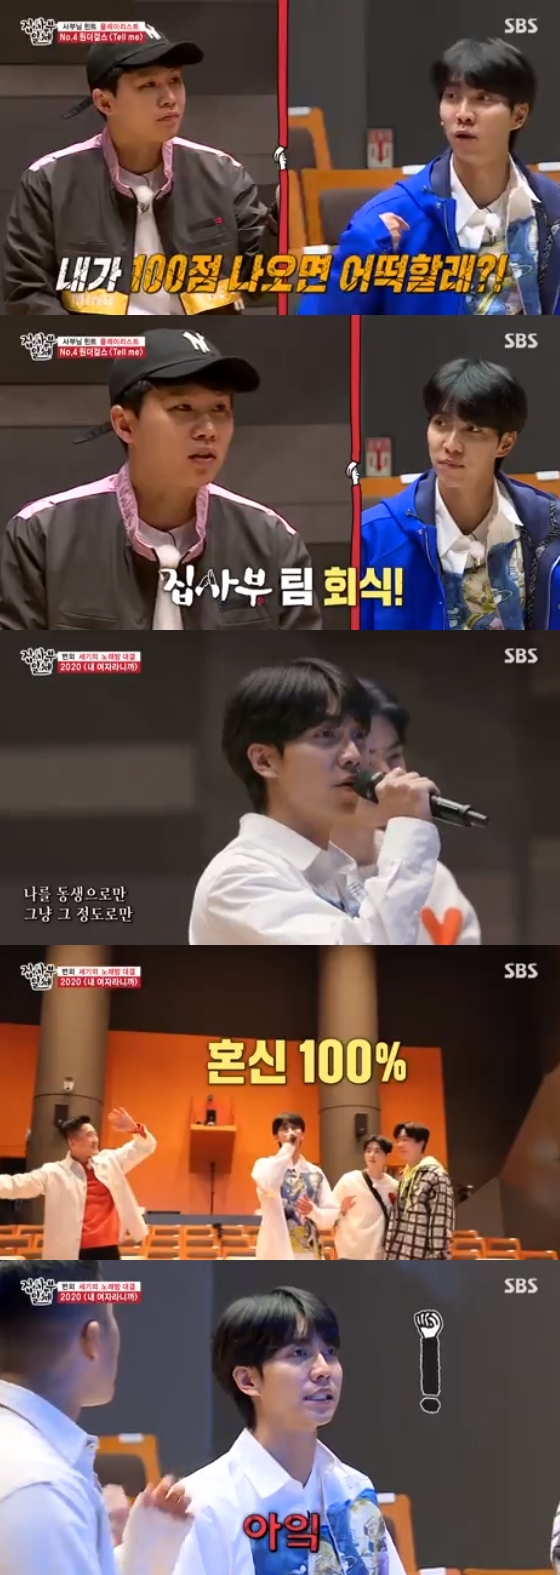 In the SBS entertainment program All The Butlers broadcasted on the afternoon of the 17th, members Karaoke score bets were released to get preparations for Master Shin Seung-hoon.Lee Seung-gi was confident that he would come out more than 90 points if he decided on the song to the production team who set the song on the day.Yang Se-hyeong snorted, Karaoke Qi Qi is not so easy.Lee Seung-gi said, I sing my song and of course I have to come out 100 points.Yang Se-hyeong, confident that 100 points wont come out, shouted, If 100 points come out, I will have an All The Butlers team dinner.Lee Seung-gi chose My Girl, saying, Im Going to Debut Songs. Lee Seung-gi said, Ive never called it in Karaoke.It is the first time in a long time, he said.In the cool look of Lee Seung-gi, who was sweating and enthusiastic, Yang Se-hyeong was waiting in front of Karaoke Qi Qi until the score was announced.Lee Seung-gis score was 97 points, and Lee Seung-gi, who eventually performed the trick, shot the dinner and made the scene into a laughing sea.